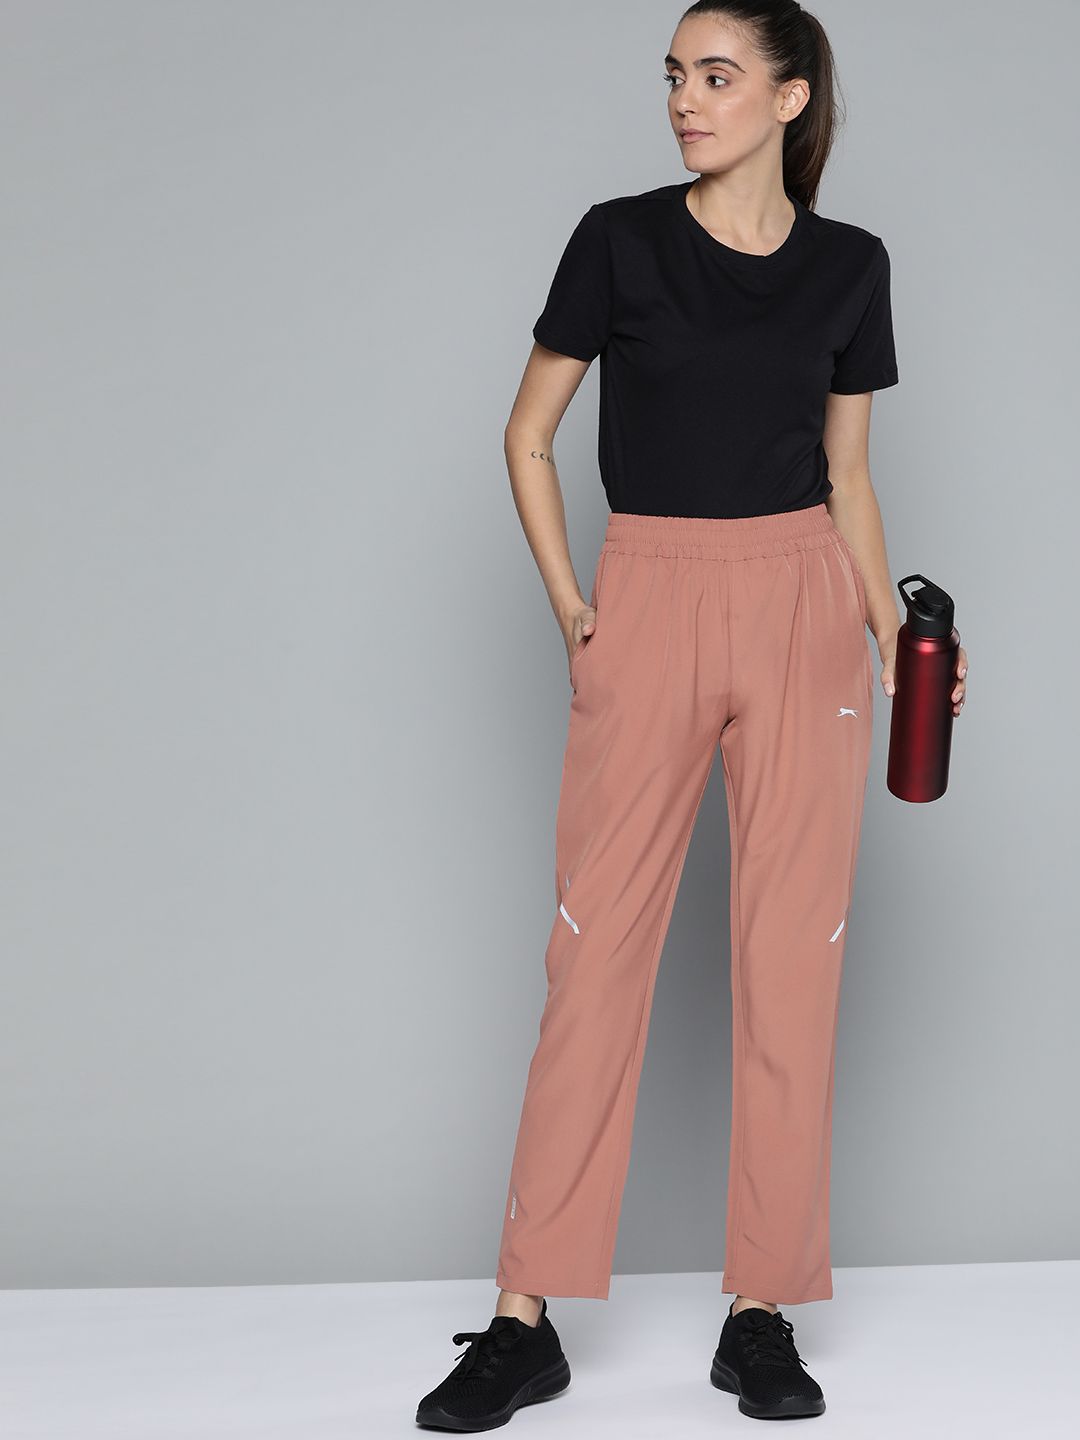 Slazenger Women Dusty Pink Solid Ultra-Dry Running Track Pants Price in India